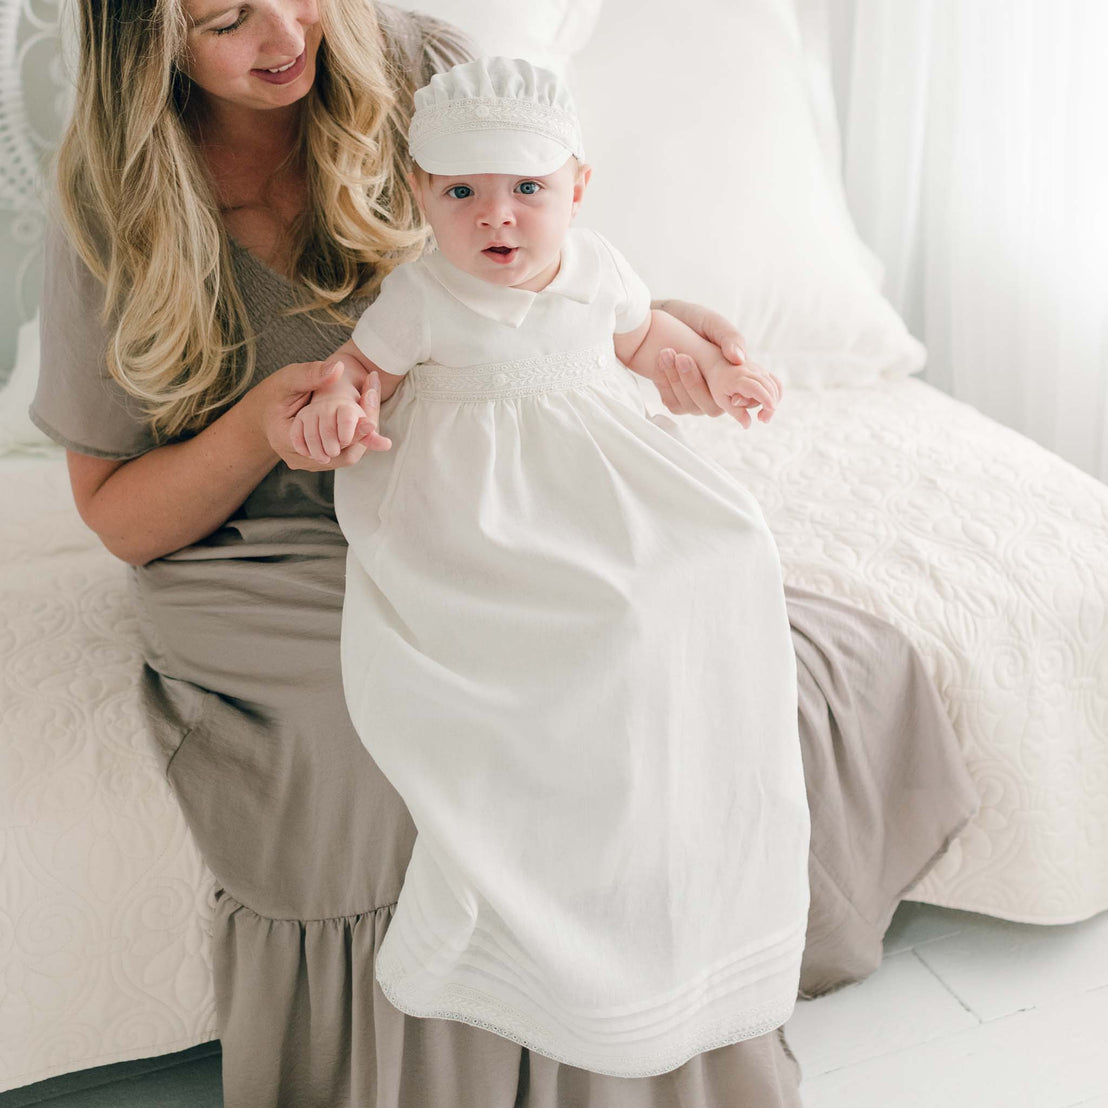 A baby wearing an Oliver Convertible Skirt adorned with Venice lace and a matching hat sits on a woman's lap. The woman, in a light gray dress, is seated on a white bedspread, holding the baby's hands. Both are looking slightly off-camera. The room has a soft, bright ambience.